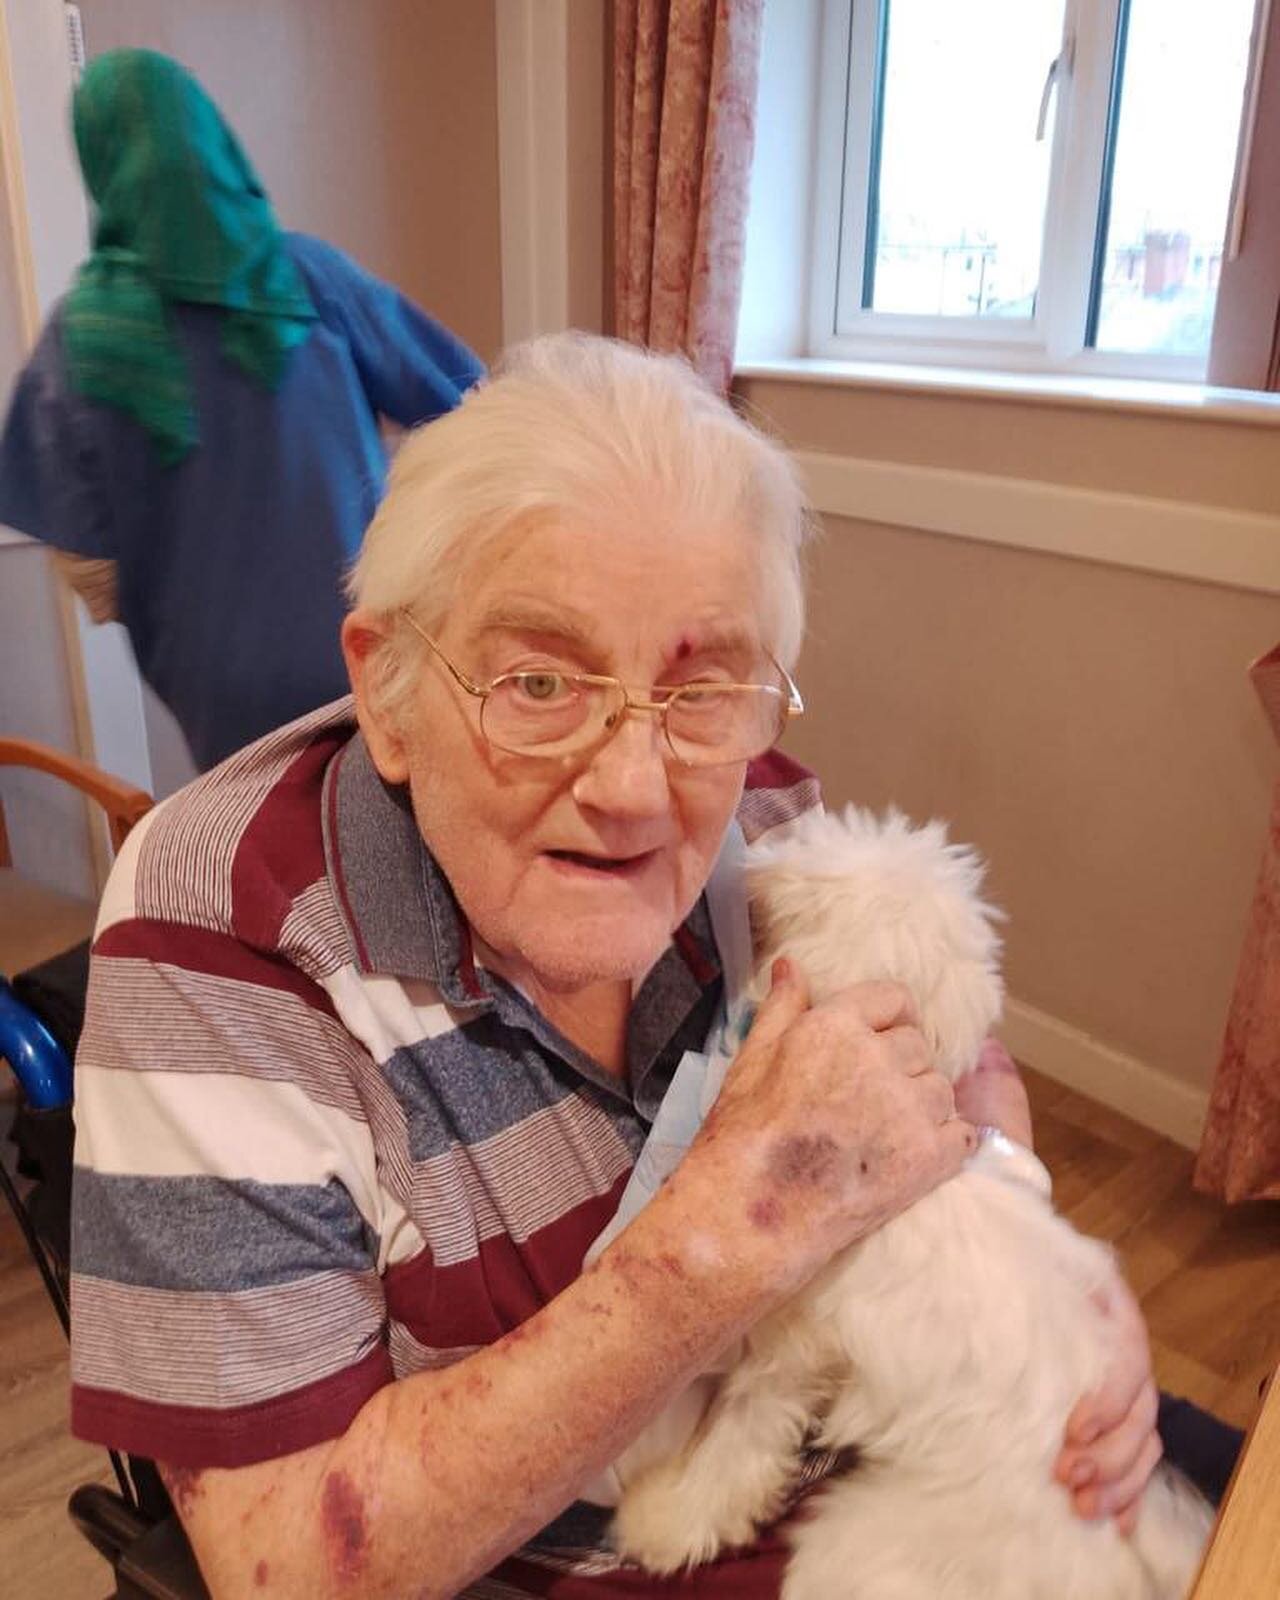 Cuddle time! Pet therapy feels so good. Our residents had a wonderful time with adorable Teddy.
.
.
.
.
#elderlycare #cuddleapet #pet #pettherapy #dogsofinstagram #doglover #animal